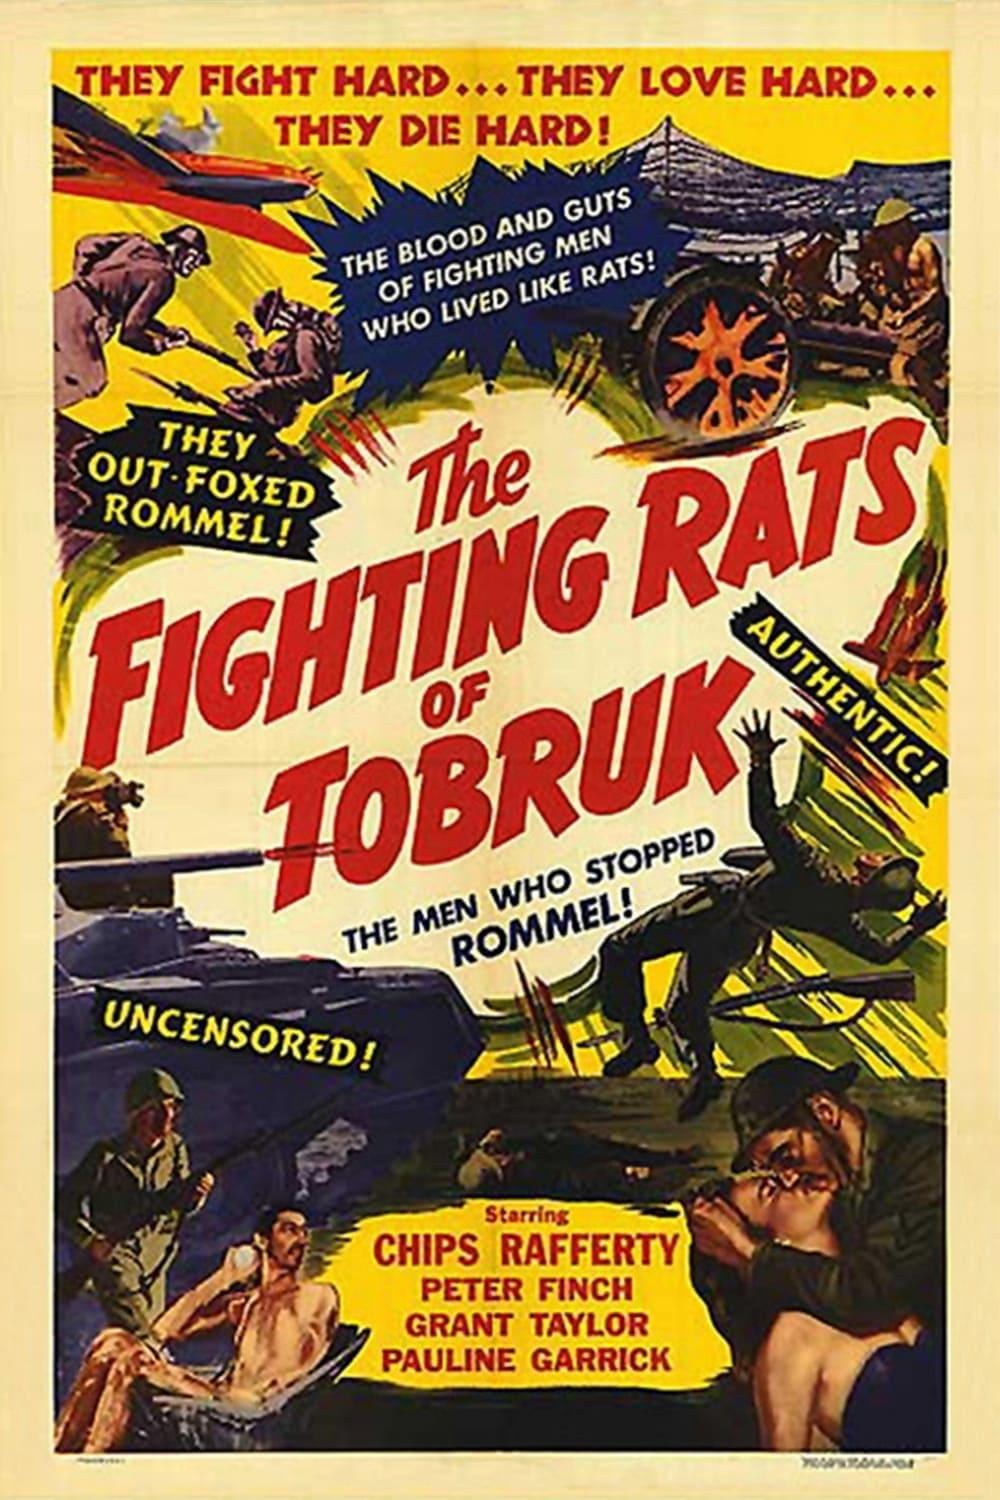 The Rats of Tobruk poster